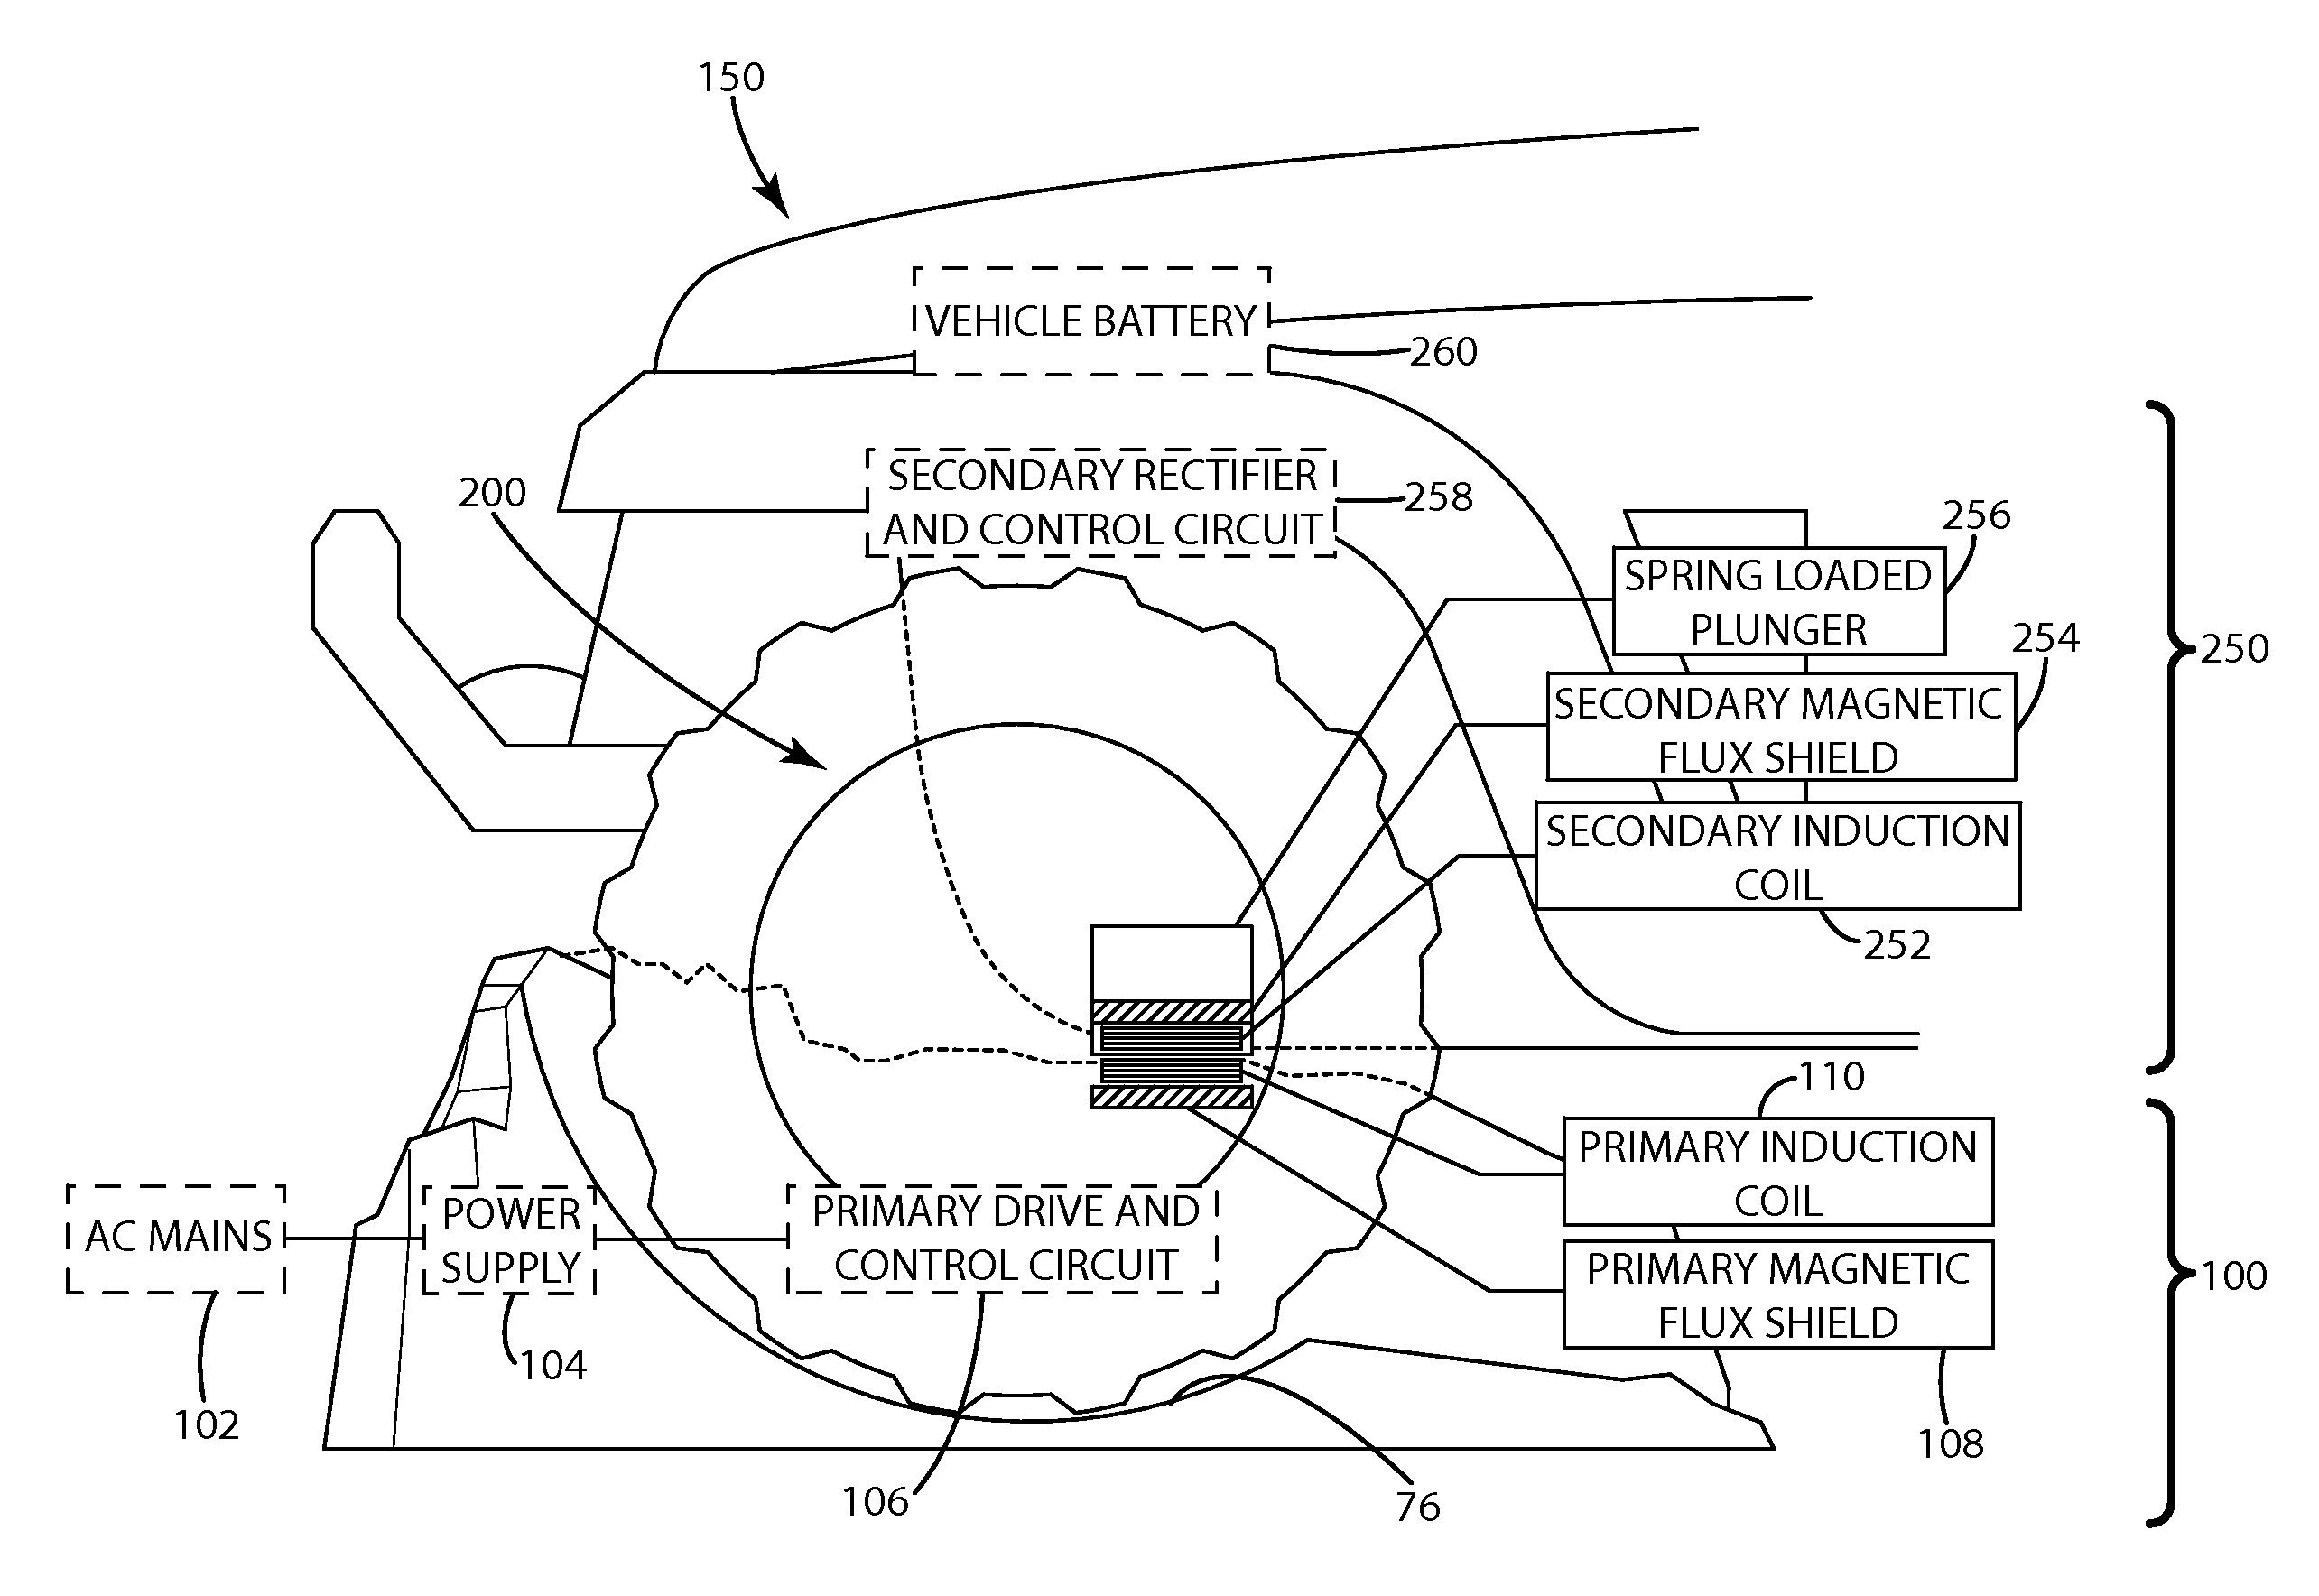 Inductive charging system for electric vehicle